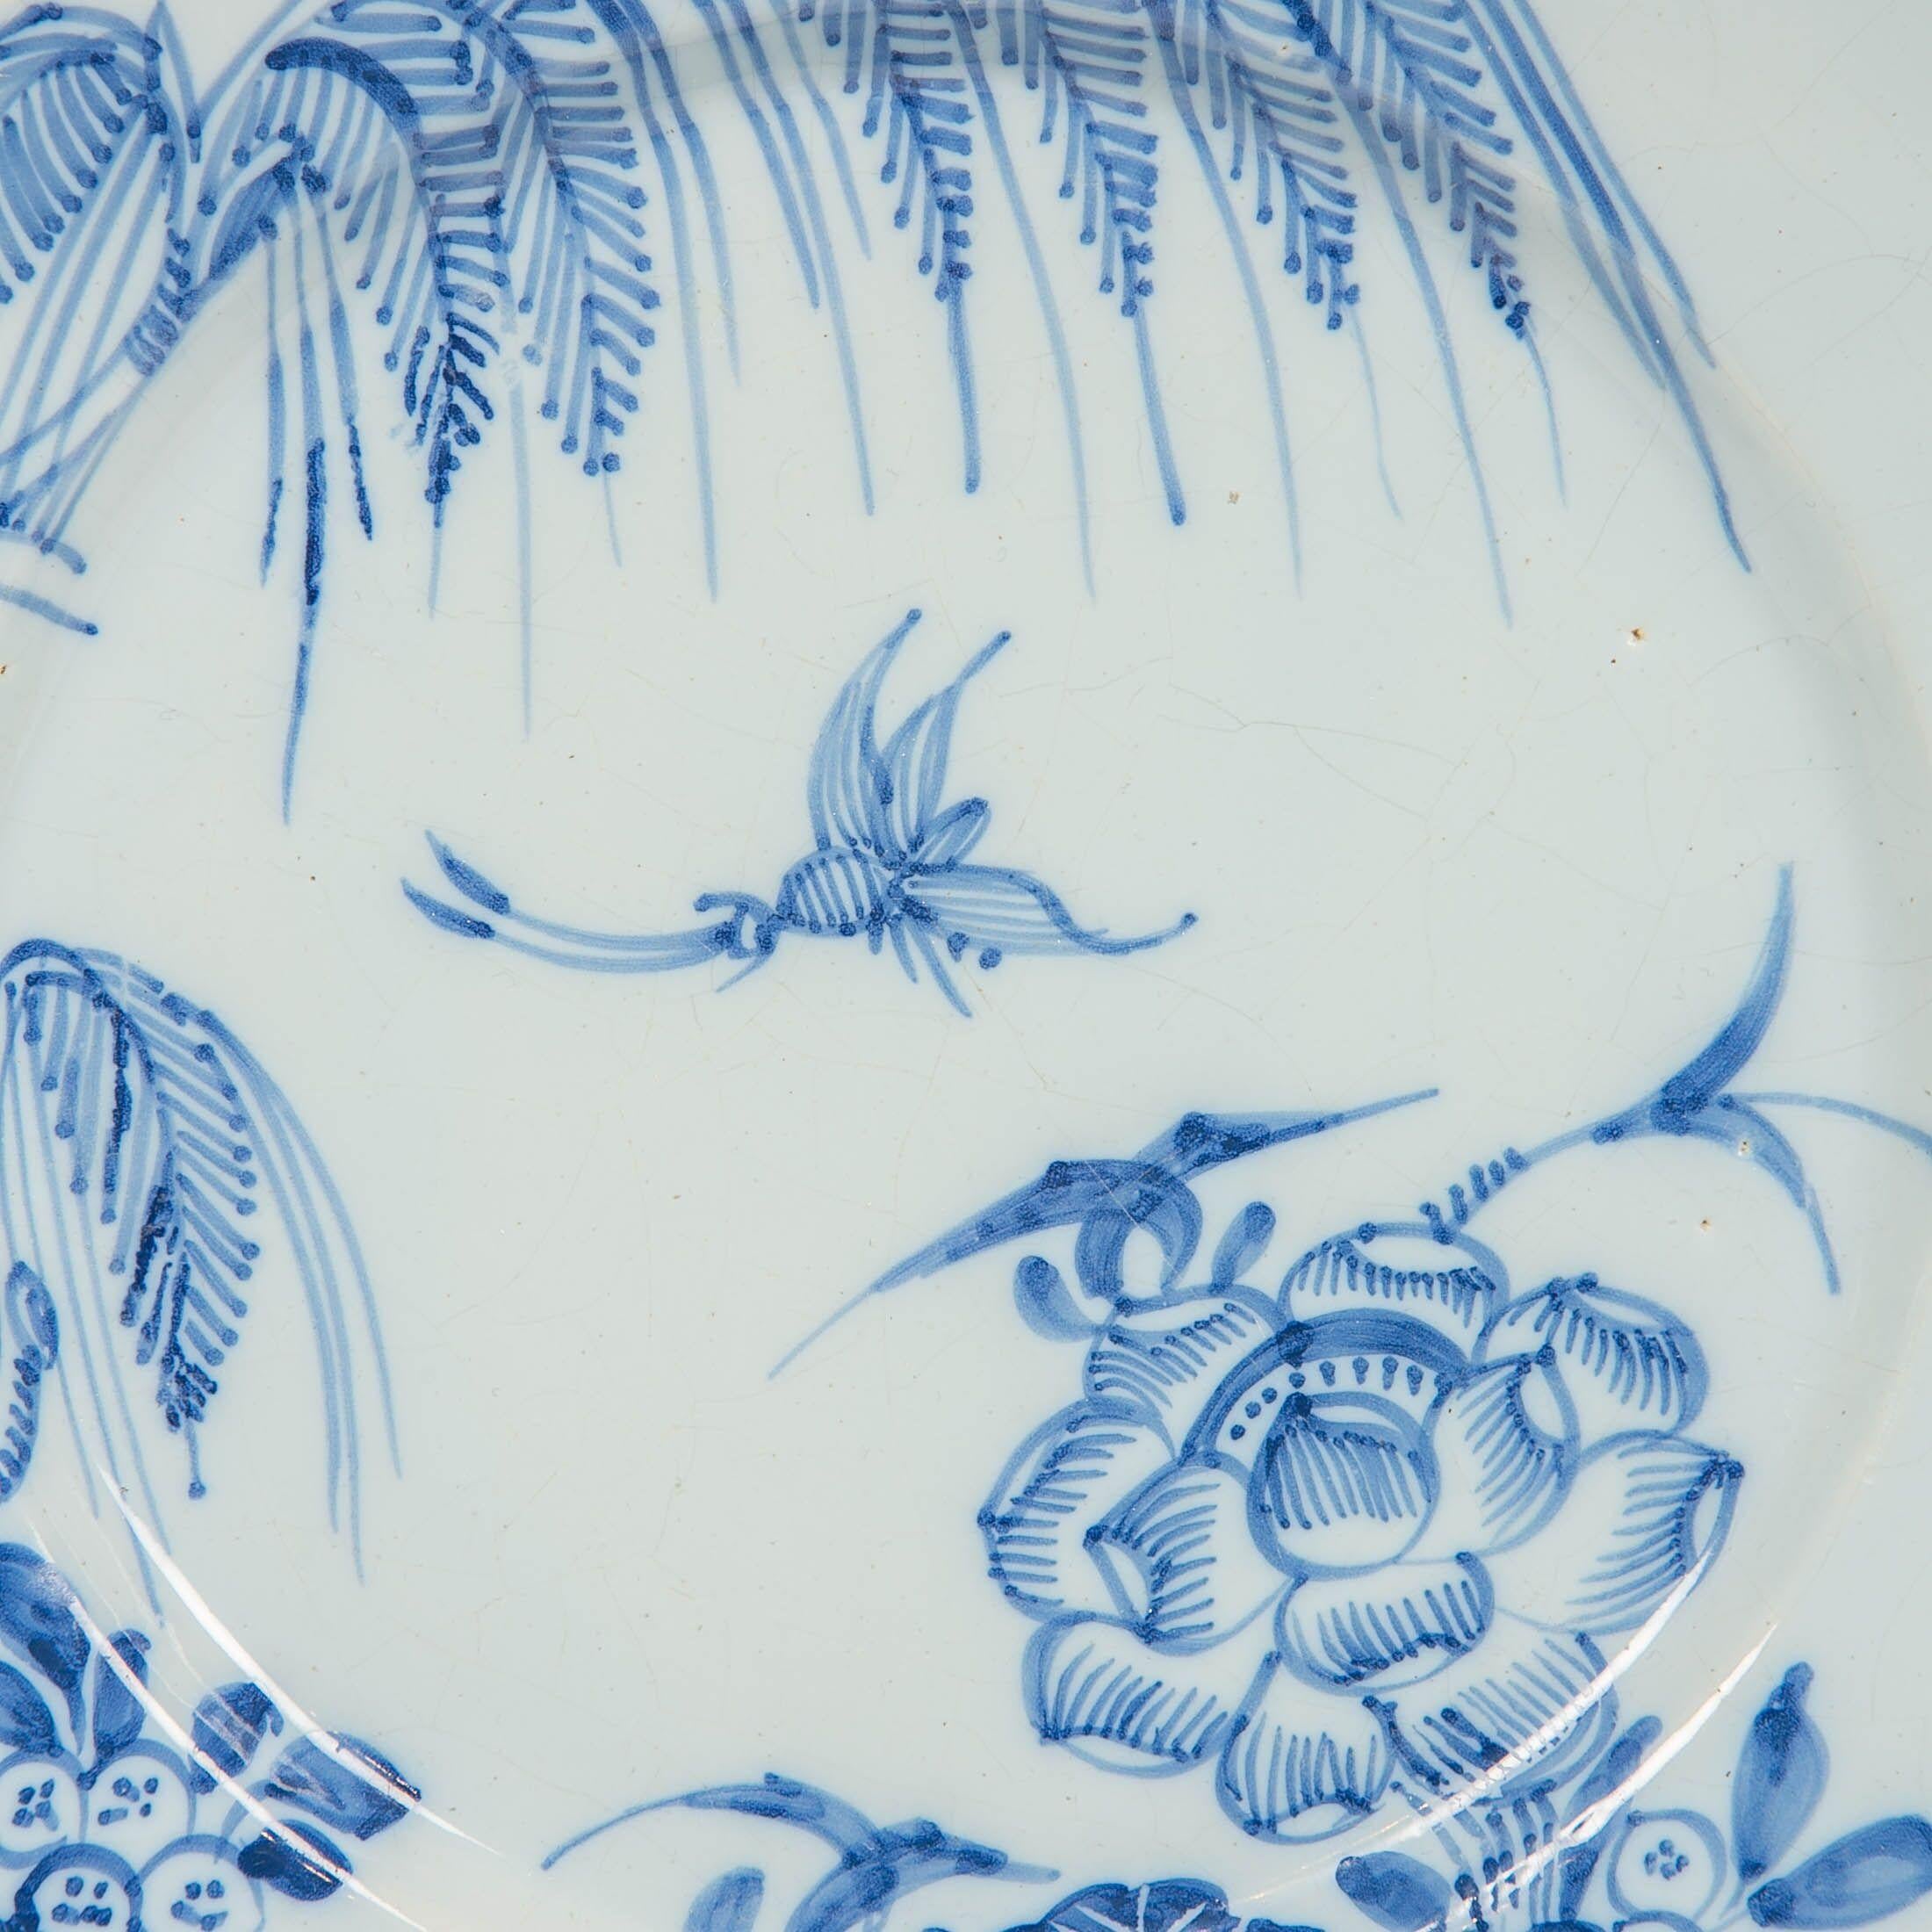 Why we love it: On one of those crazy days looking at this brings serenity.
A pair of antique blue and white delft plates painted in a medium cobalt blue. These English delftware dishes were made in the mid-18th century, most probably in *Lambeth,